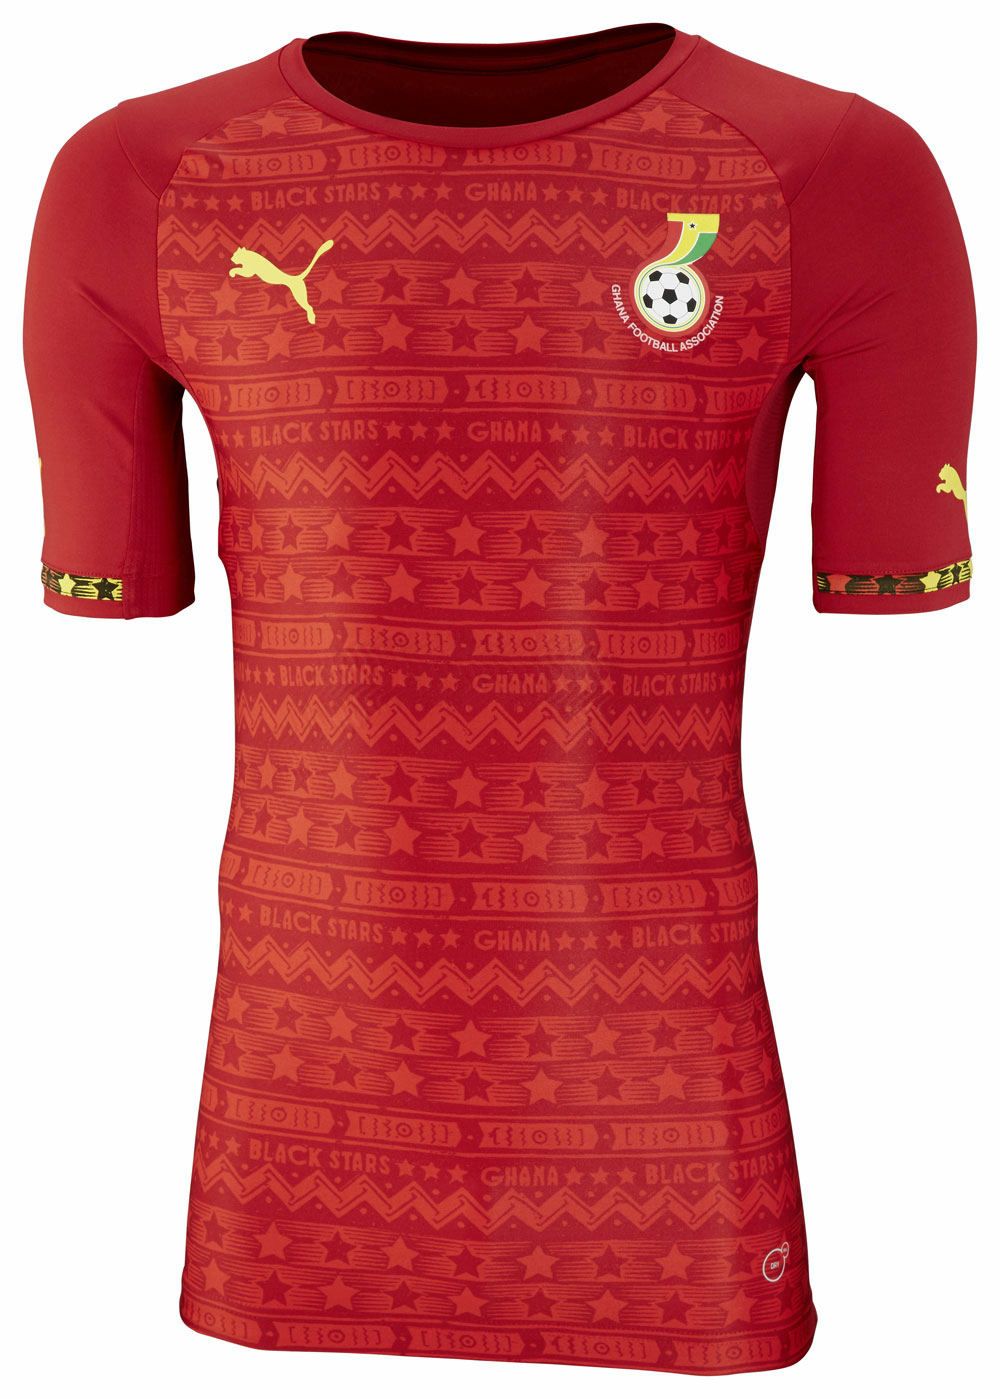 black stars jersey for afcon 2019